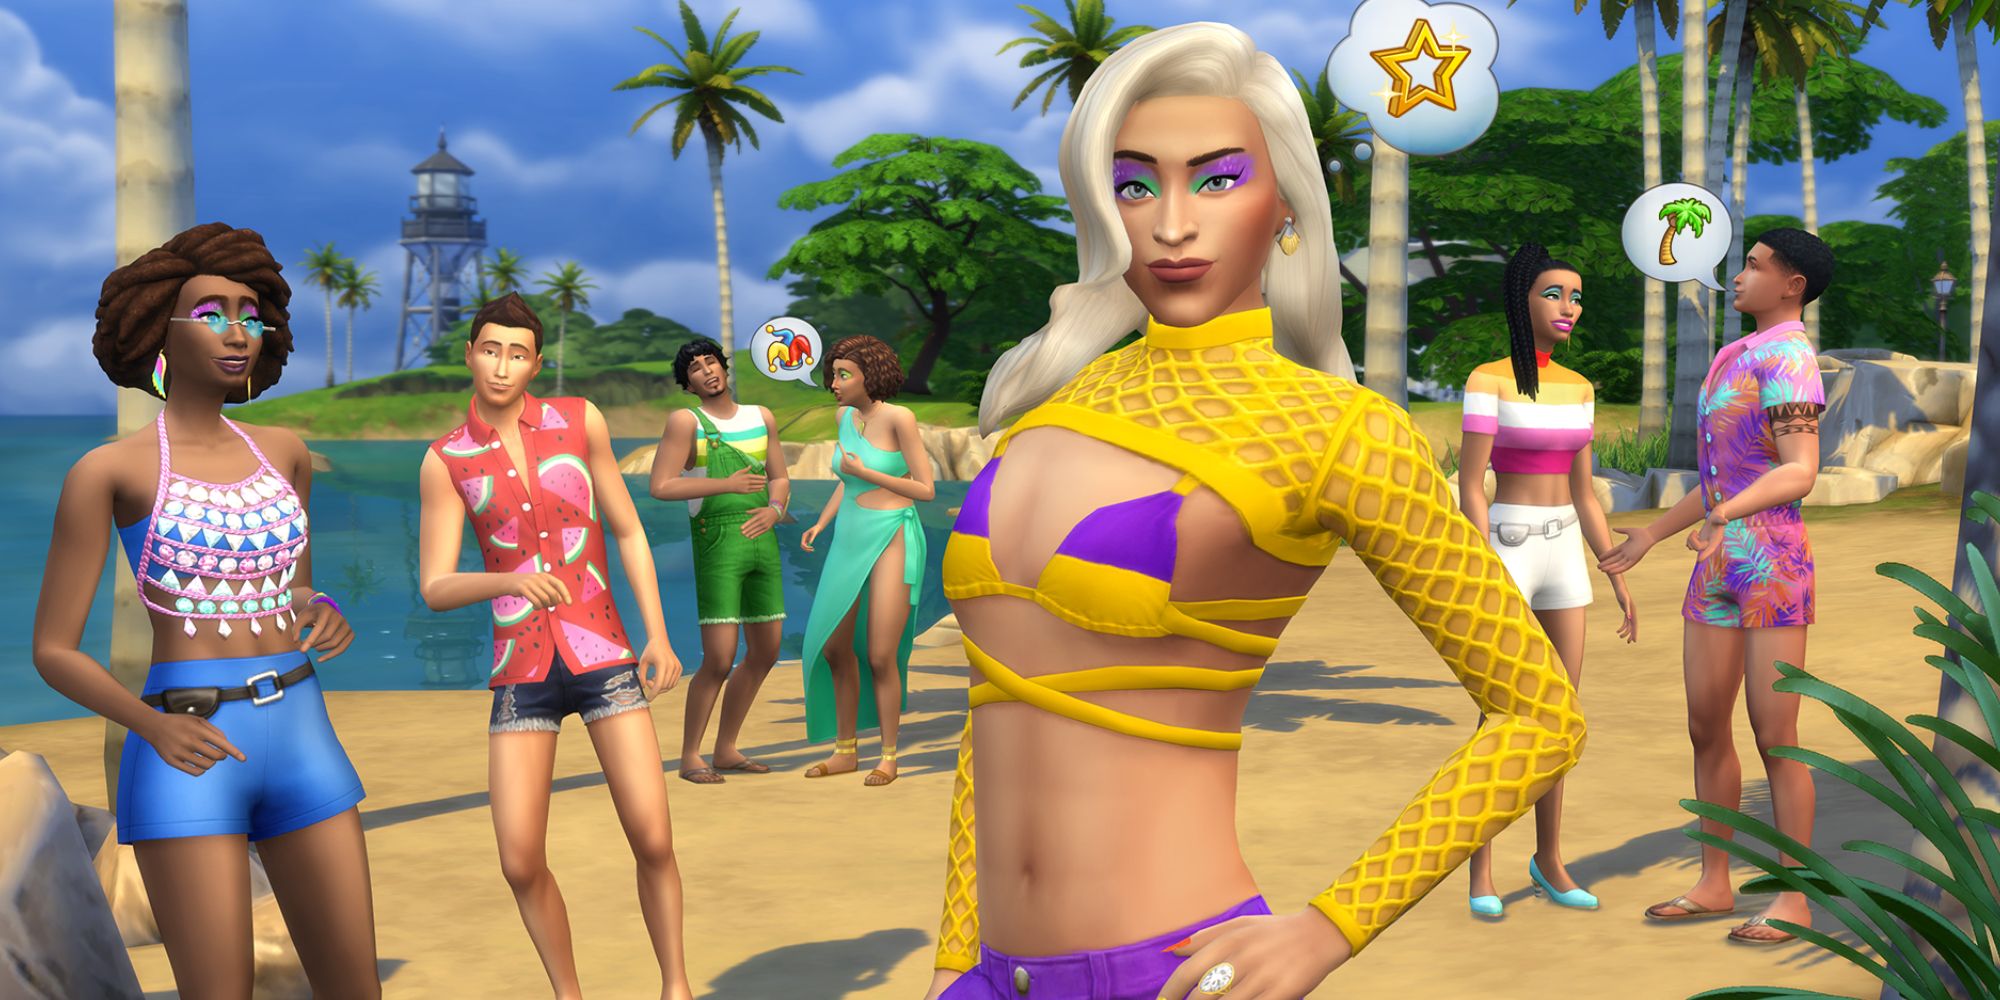 Sims 4 Carnaval wear worn by 7 sims on a beach of differing genders.